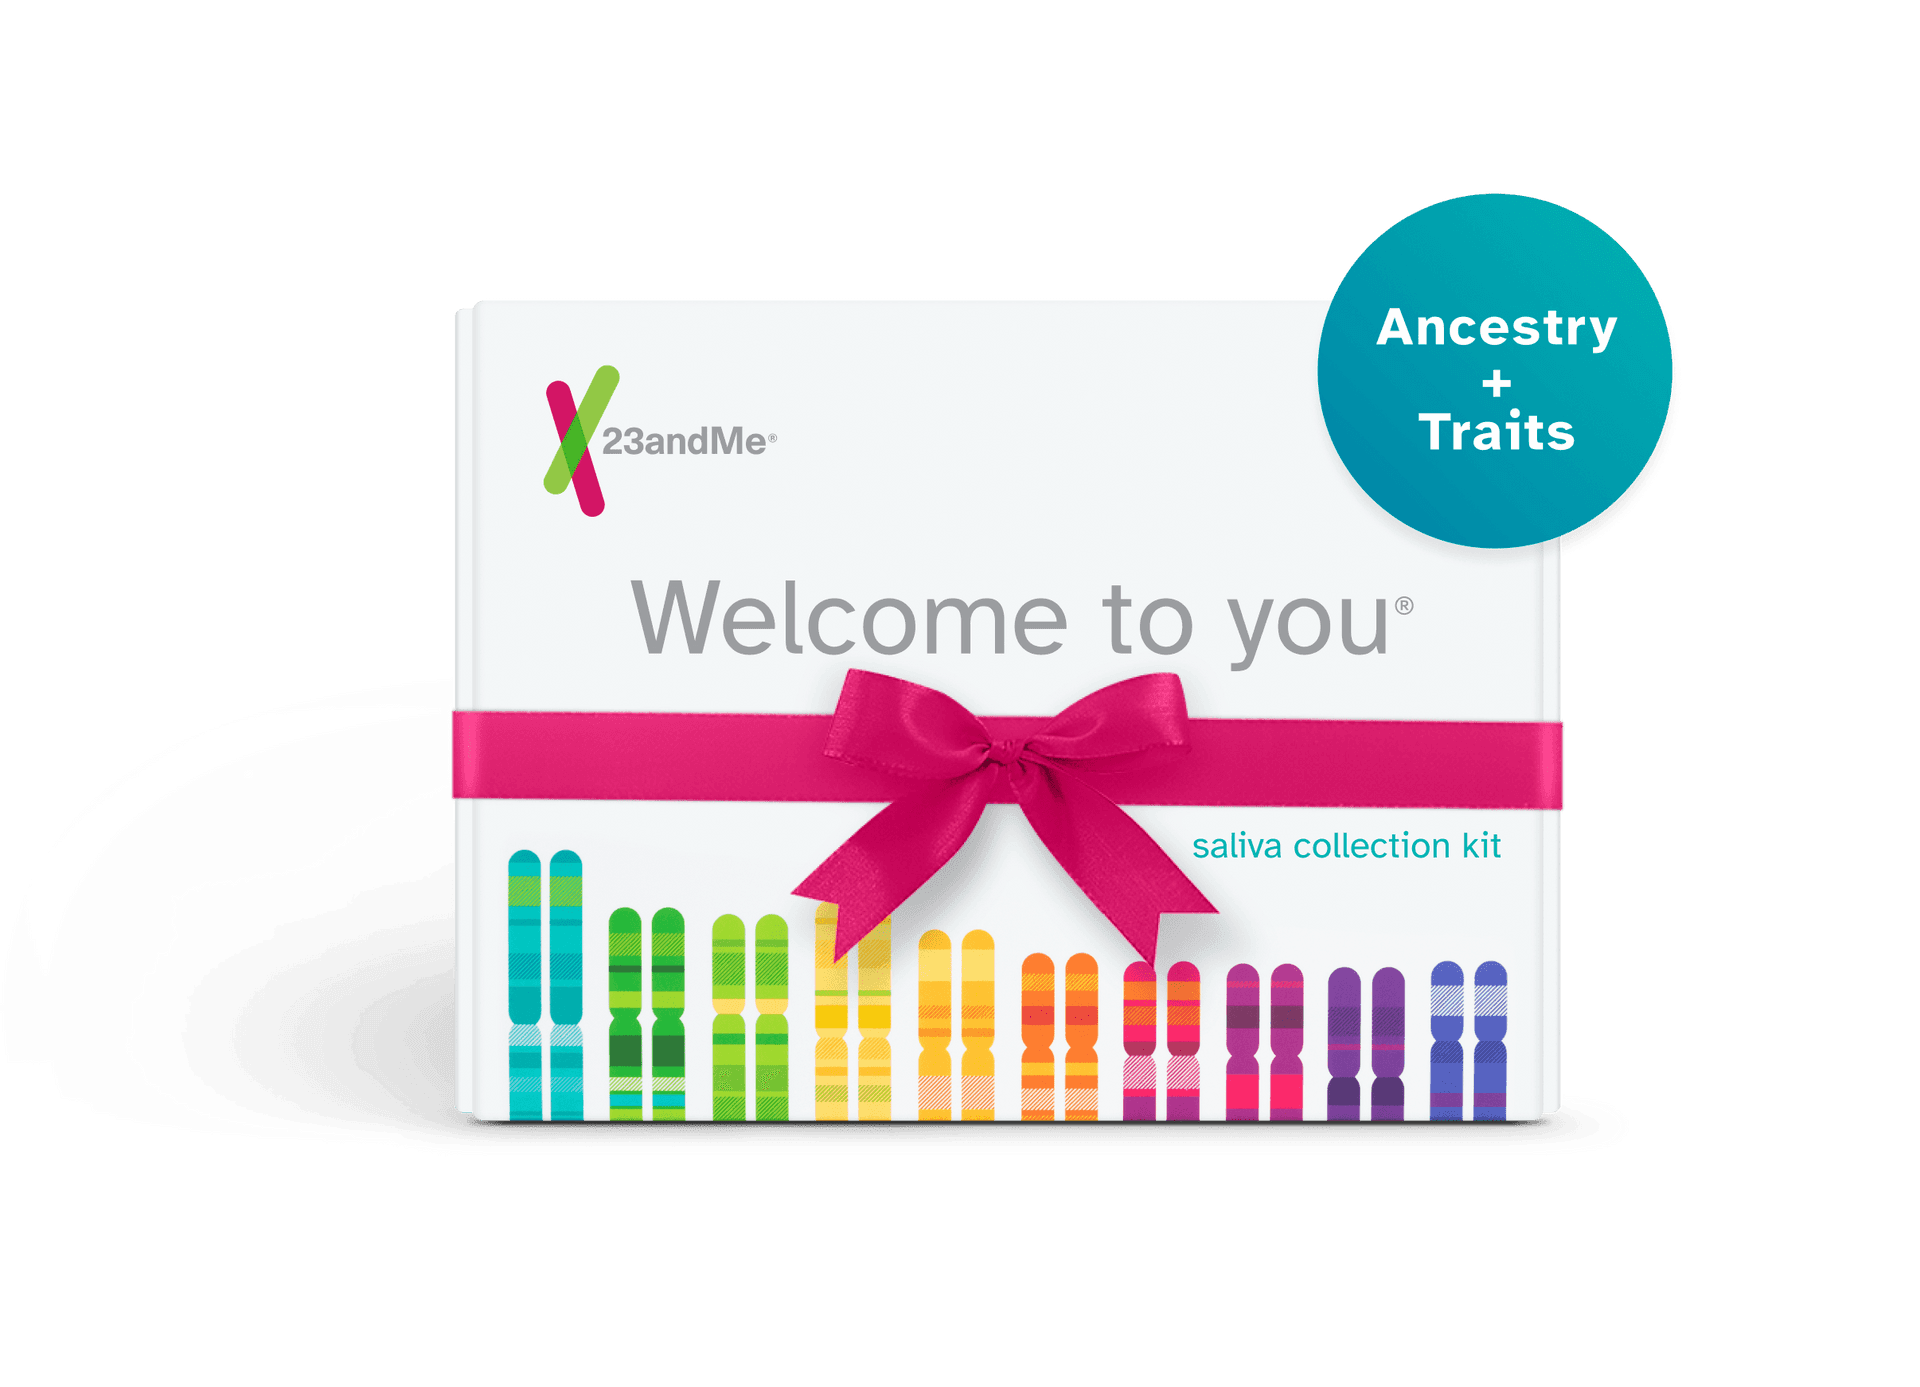 dna-genetic-testing-for-ancestry-traits-23andme-international